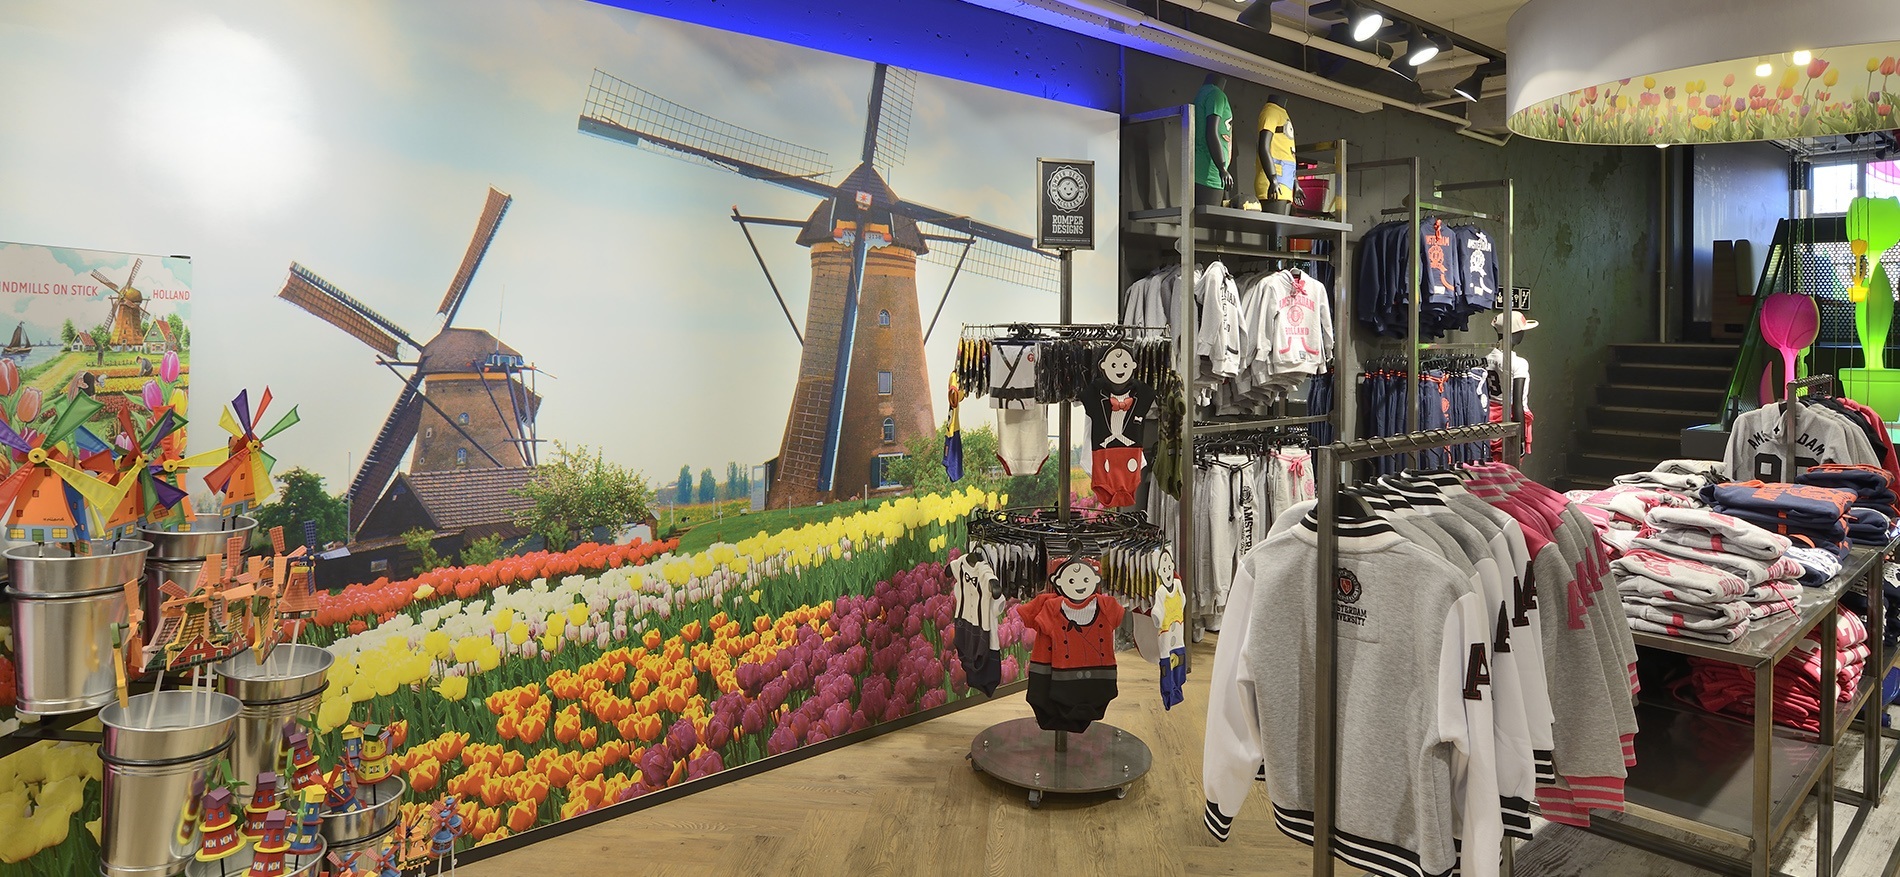 Shopping is toll: Amsterdam Designs - 